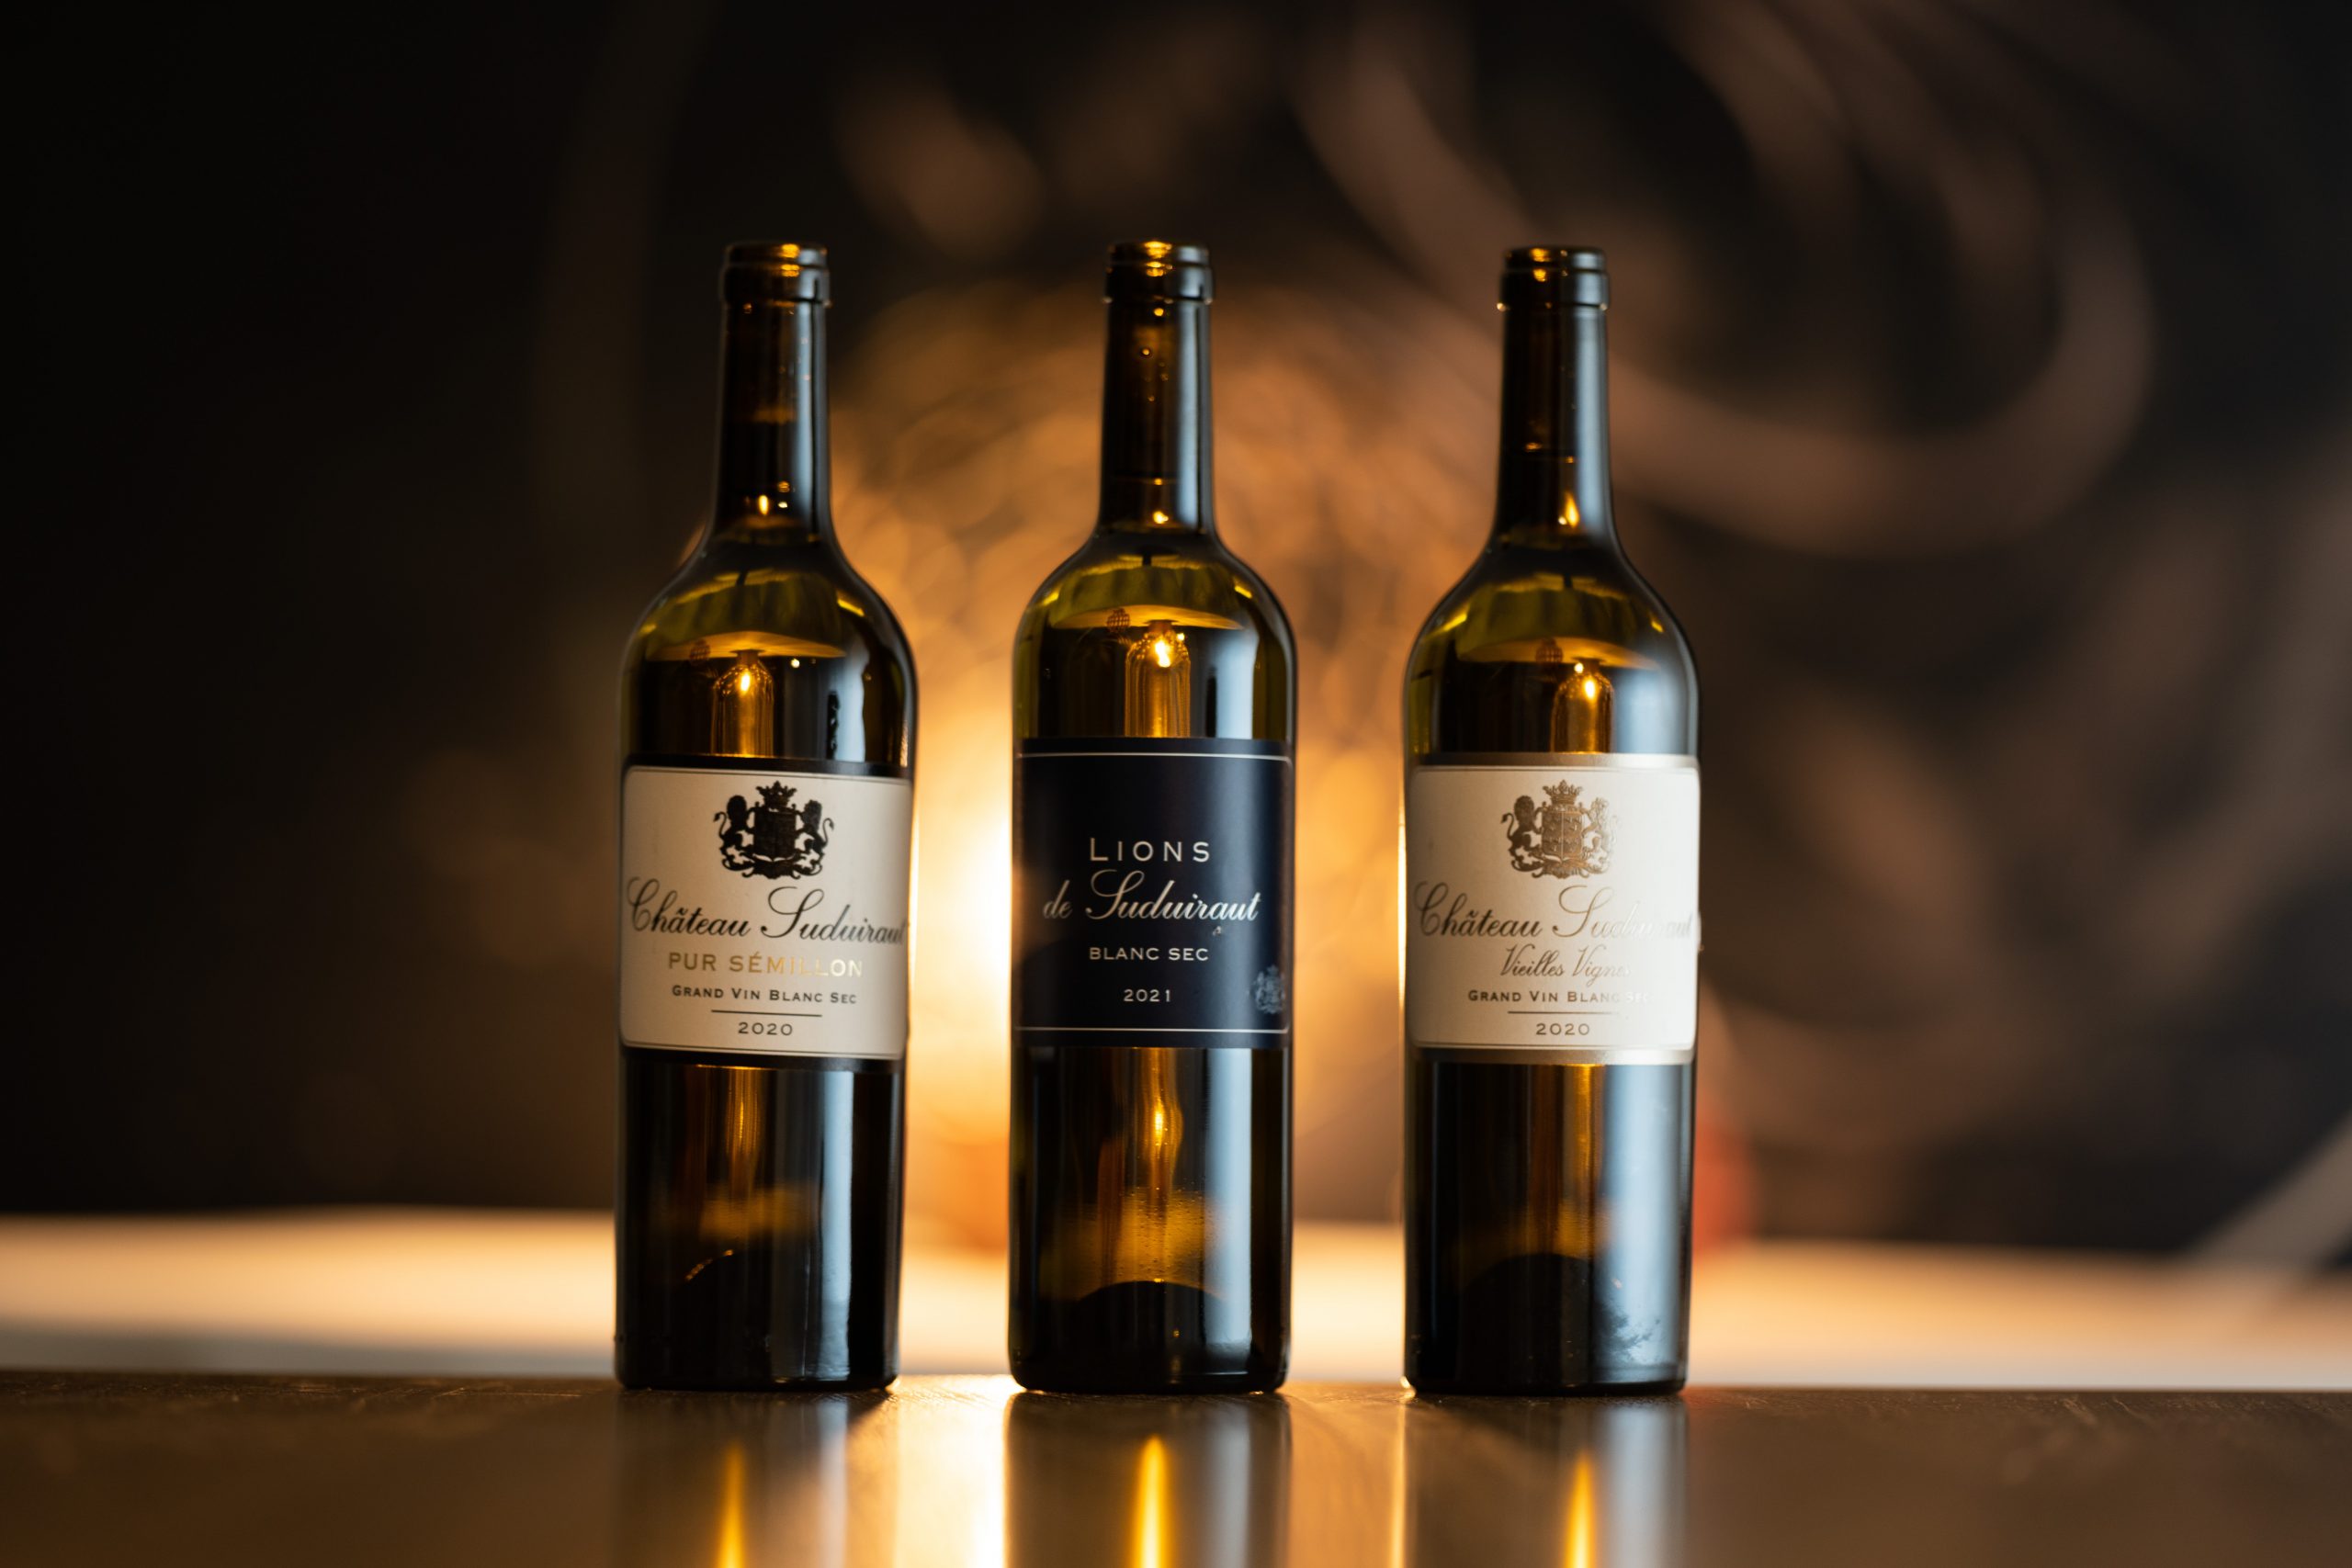 Château Suduiraut launches new range of dry white wines